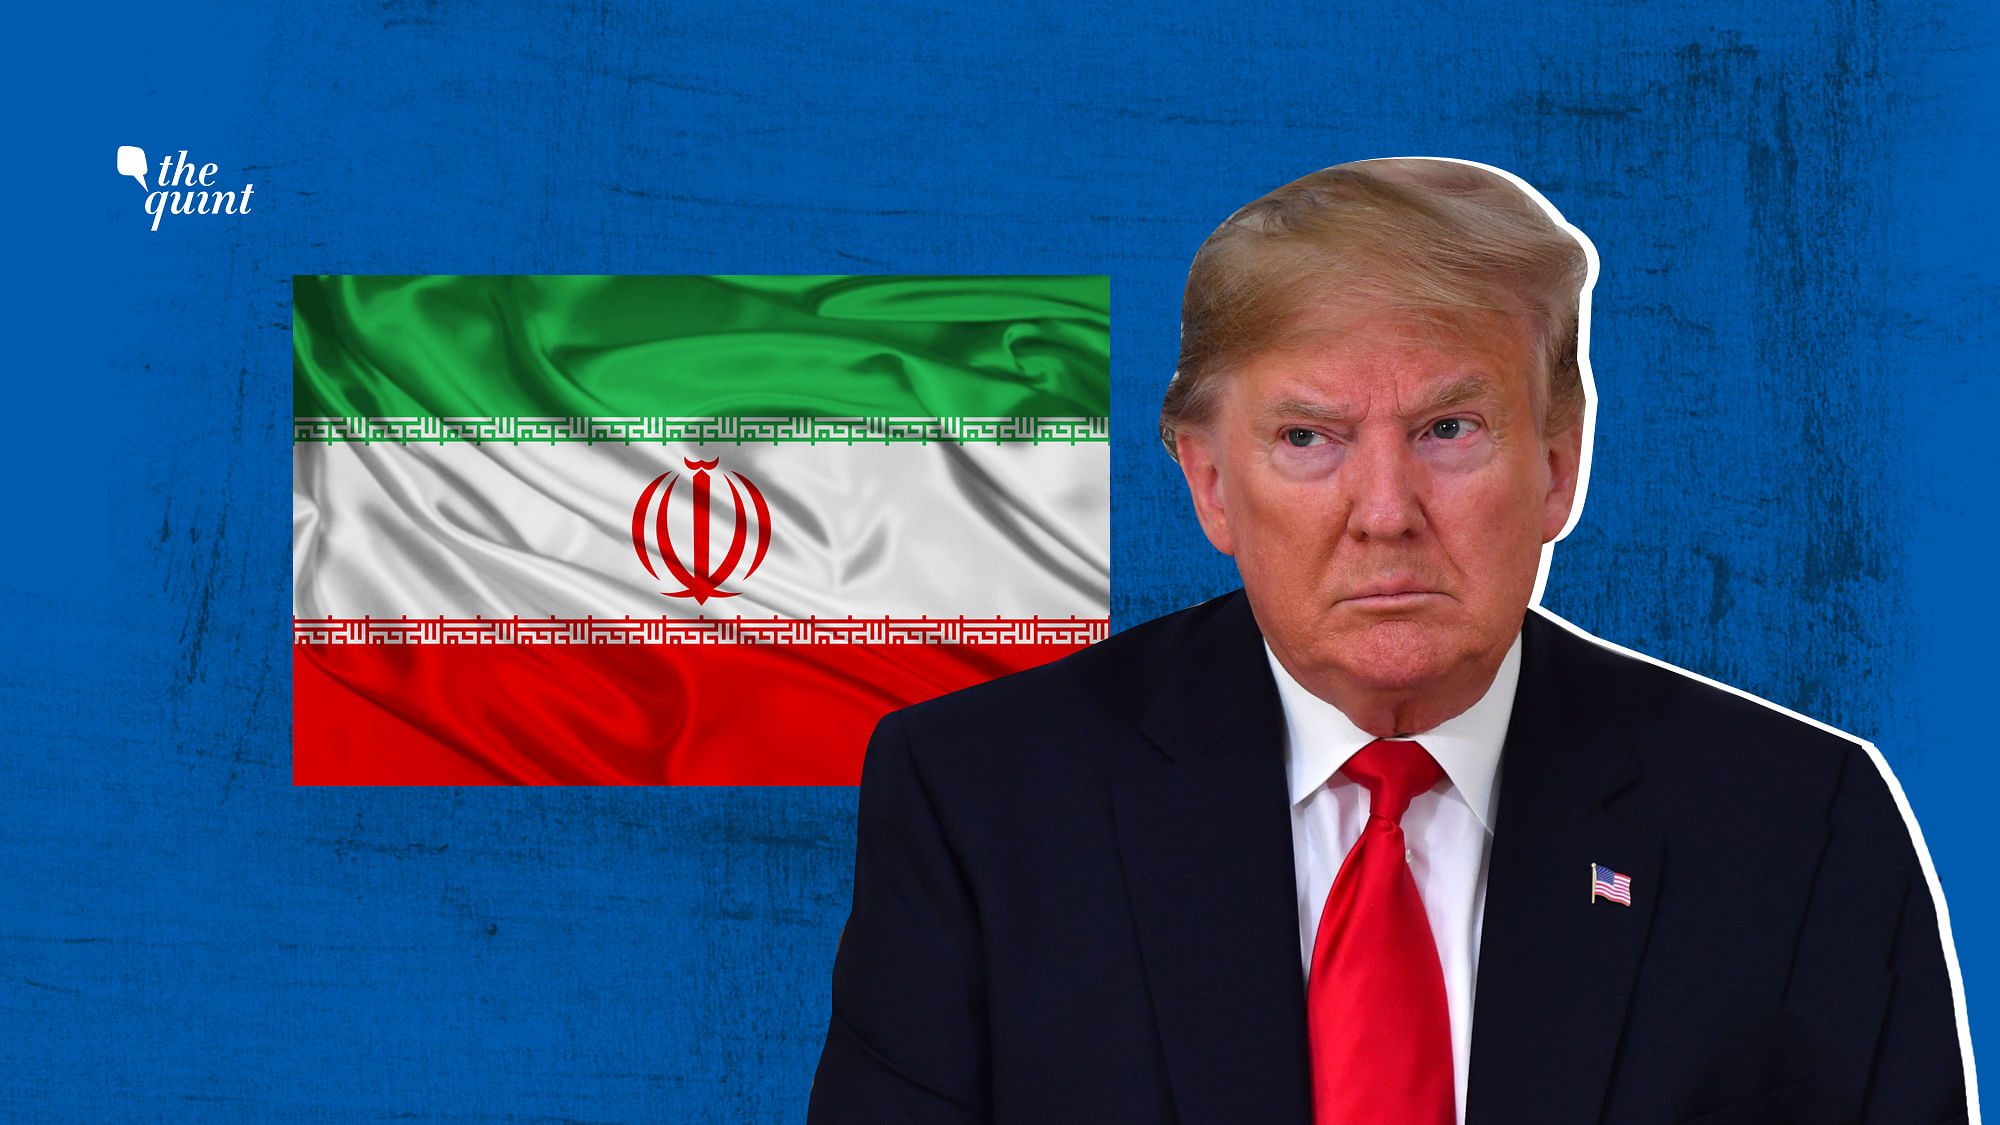 Image of Trump and Iran flag used for representational purposes.